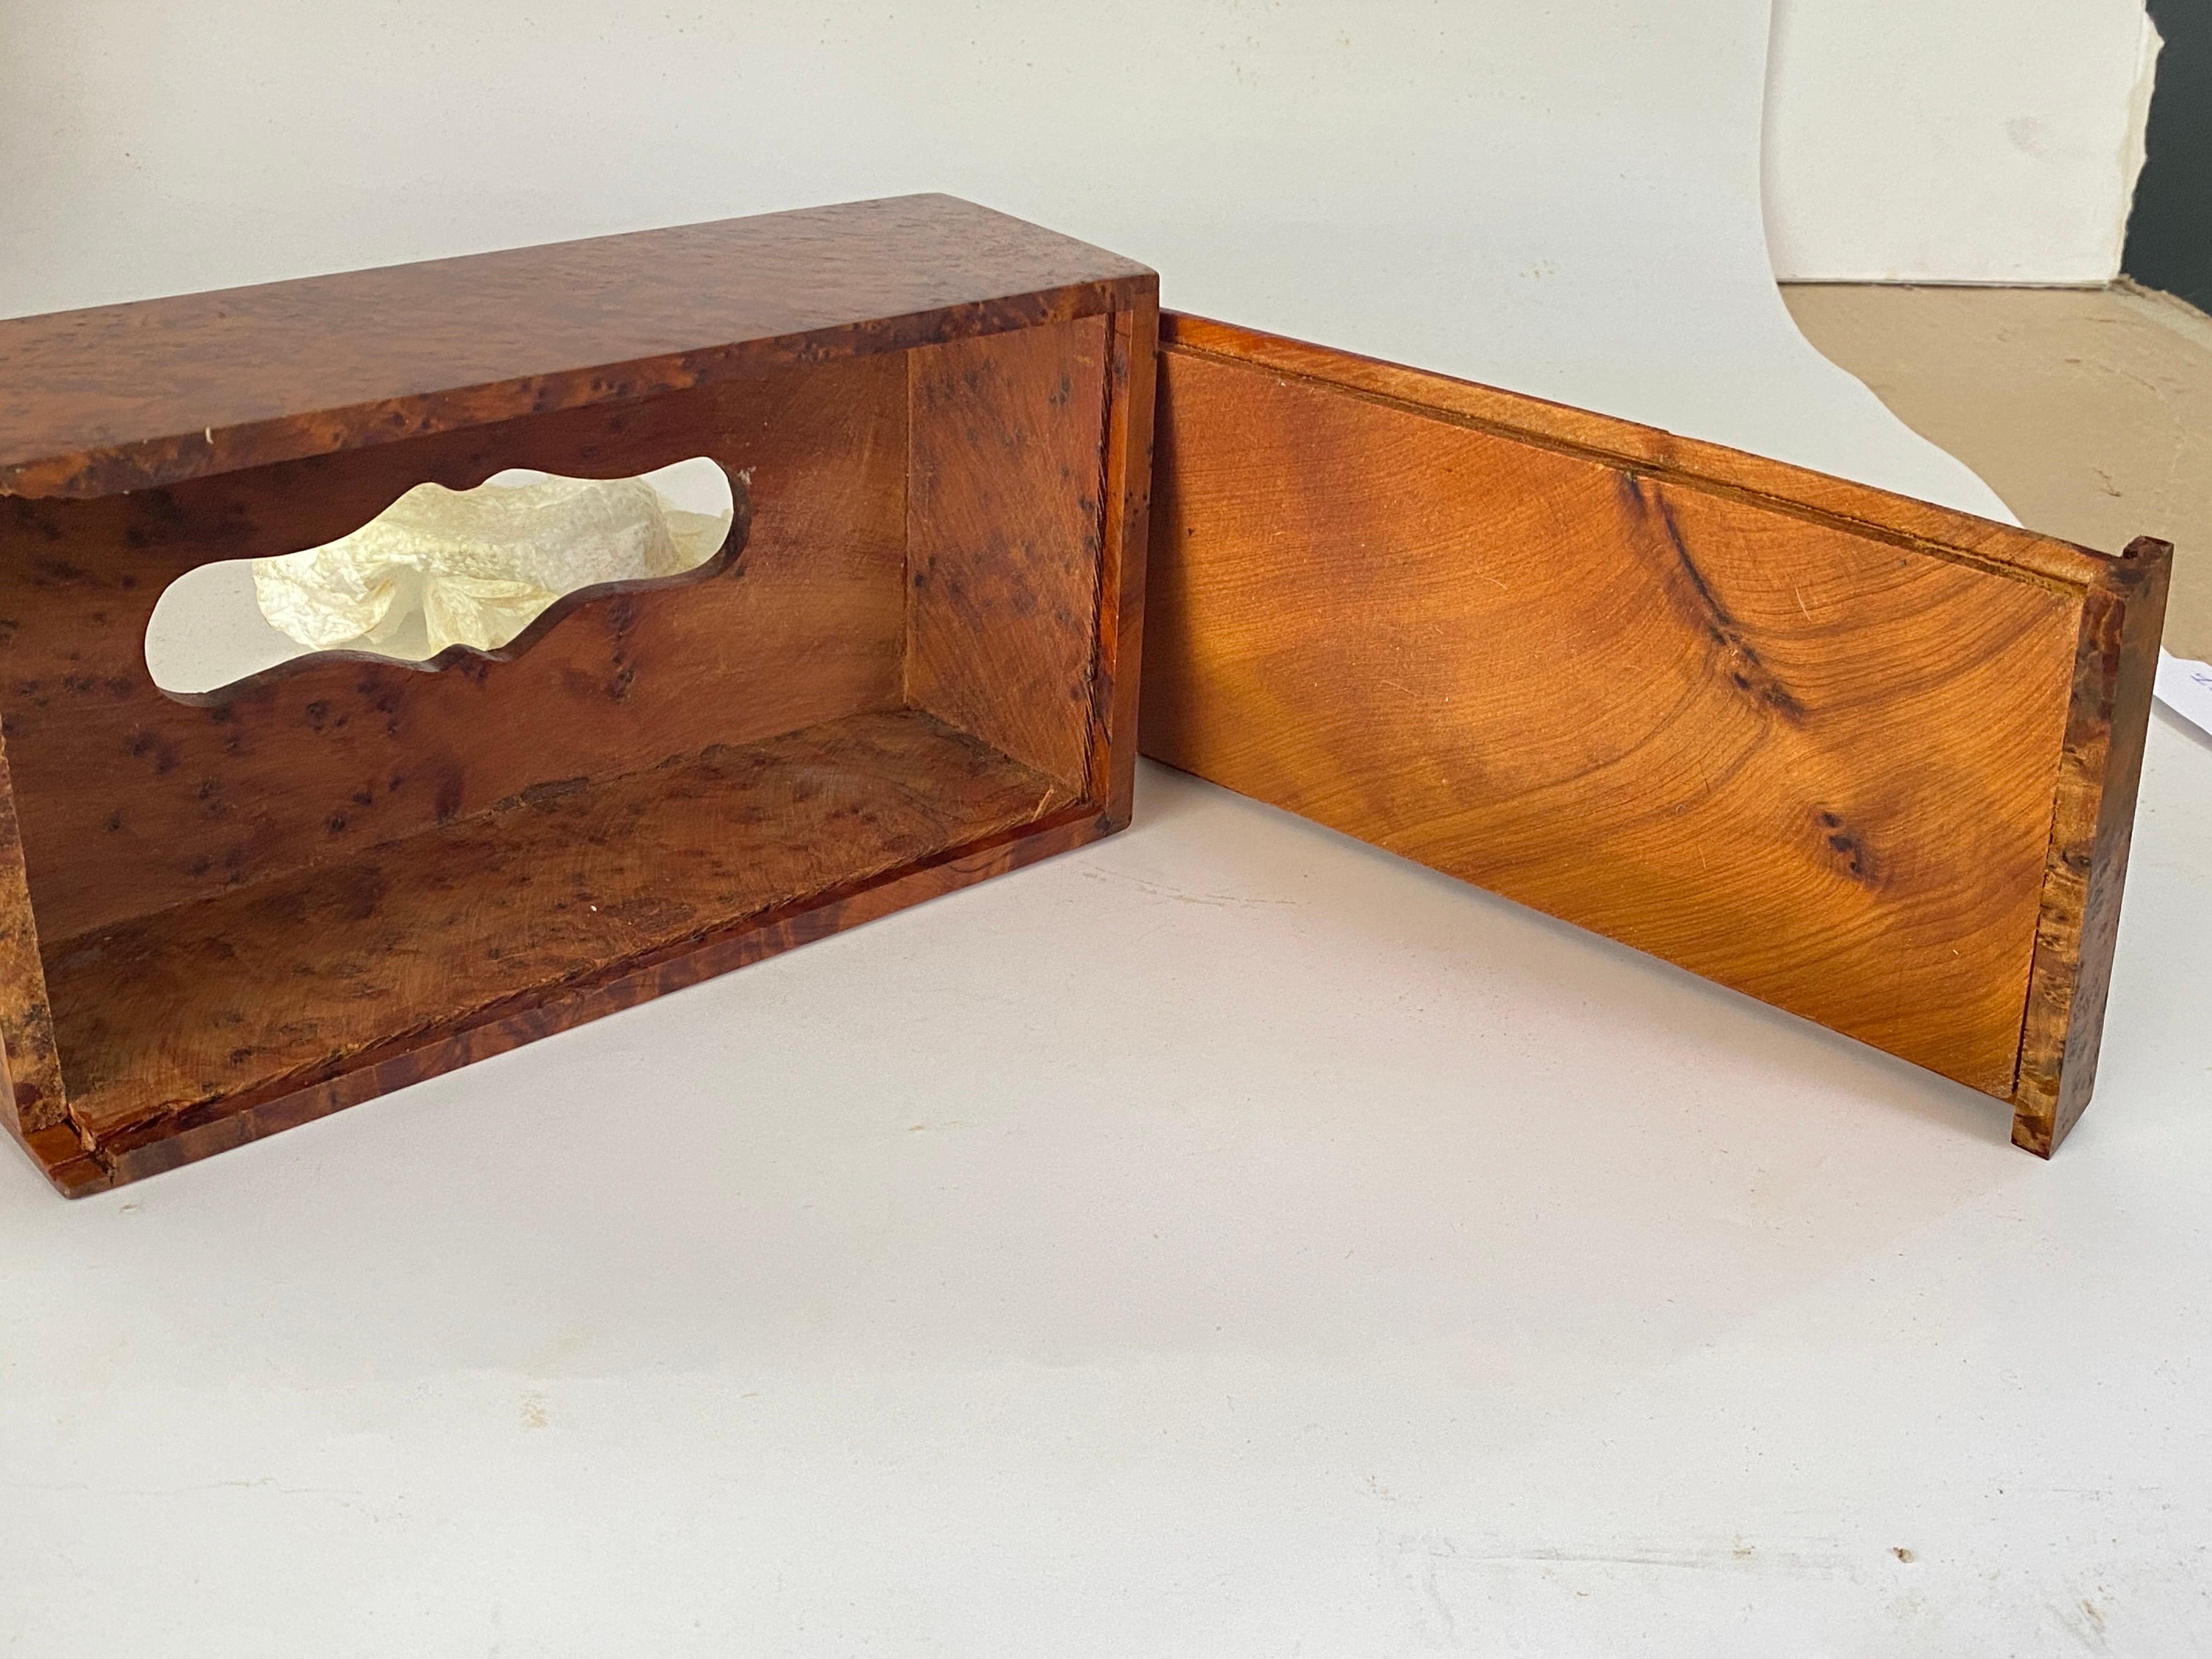 Very nice Paper Tissue box, or decorative Box in Burl Wood. This box is large, was made in France in the 1970s. It has a brown color.
